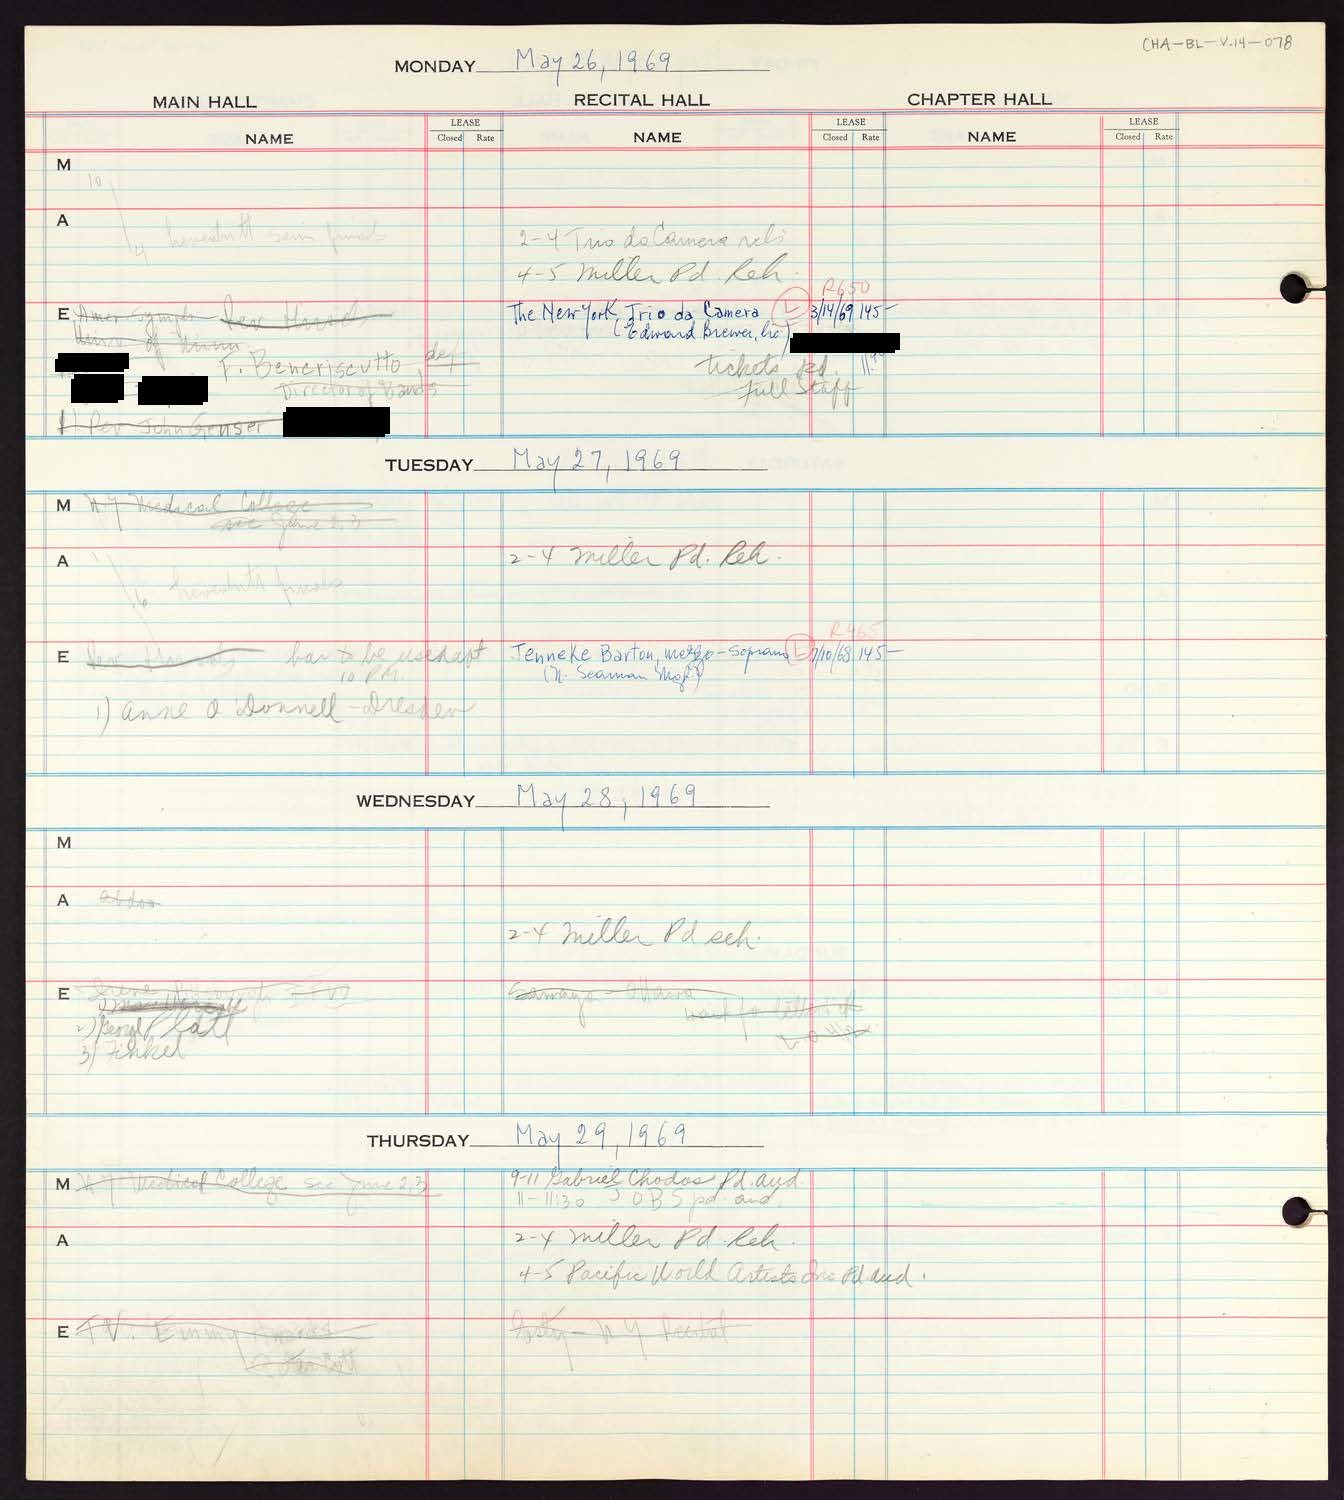 Carnegie Hall Booking Ledger, volume 14, page 78